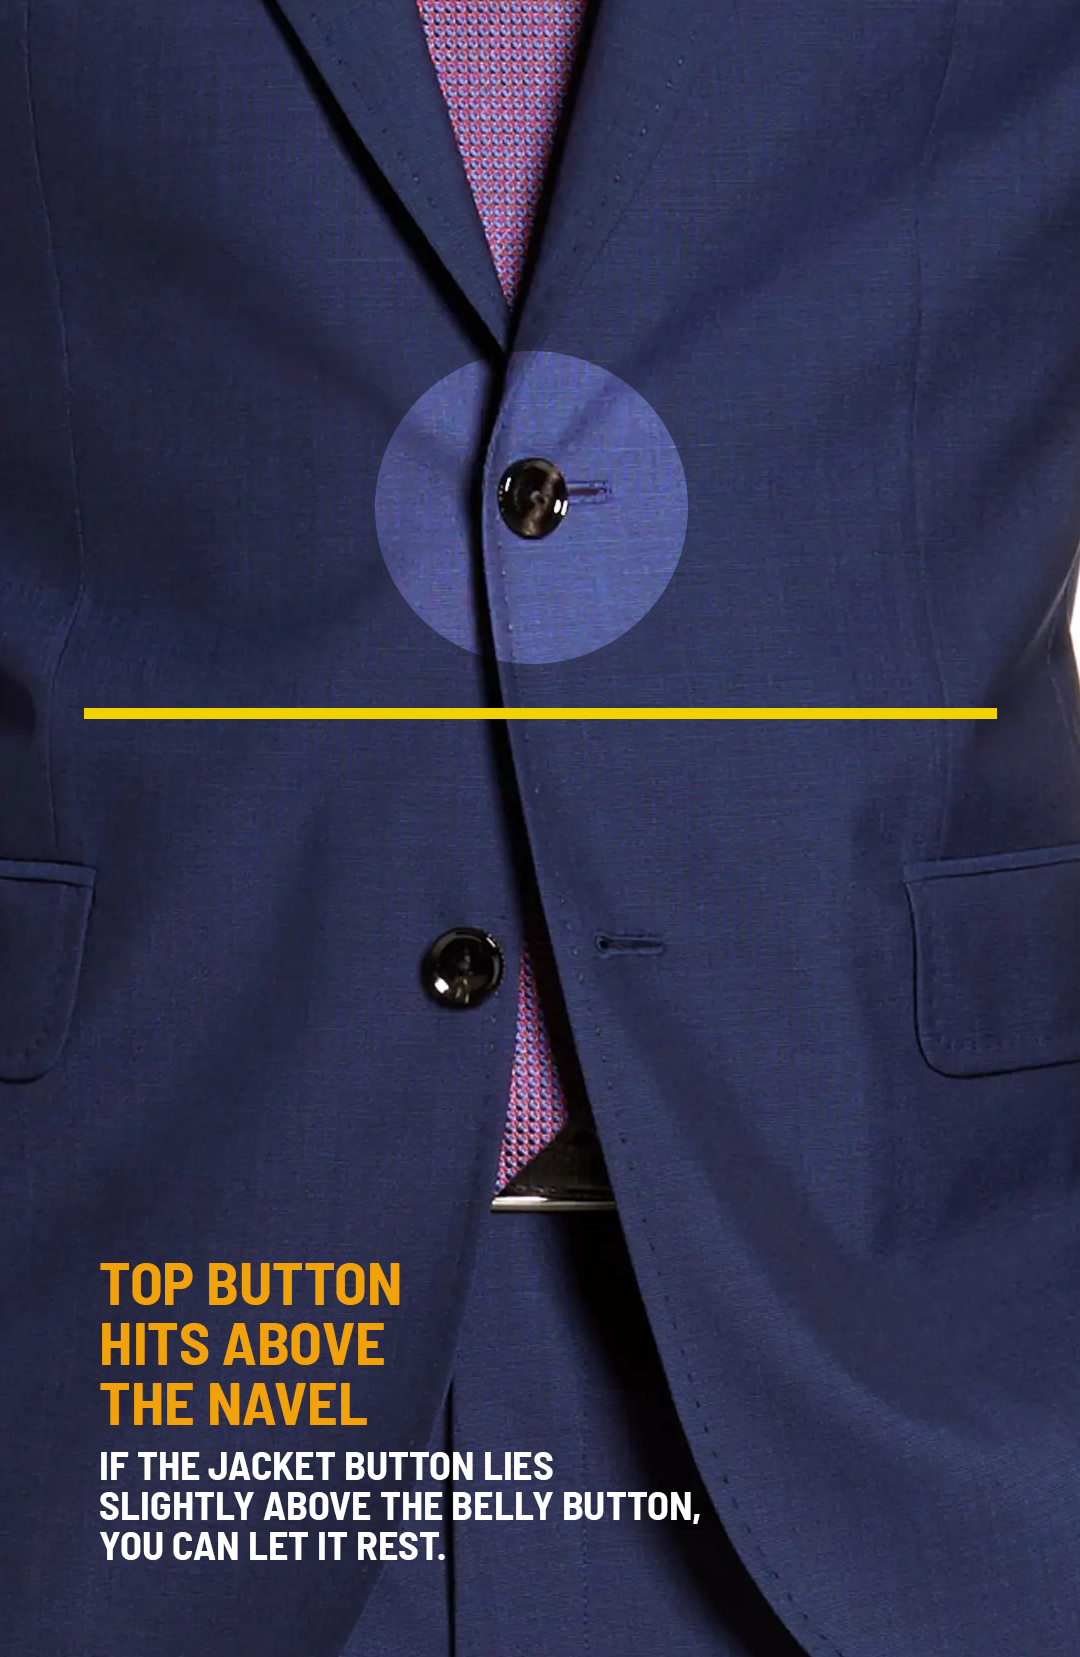 Top button hits above the navel on a two-button suit jacket